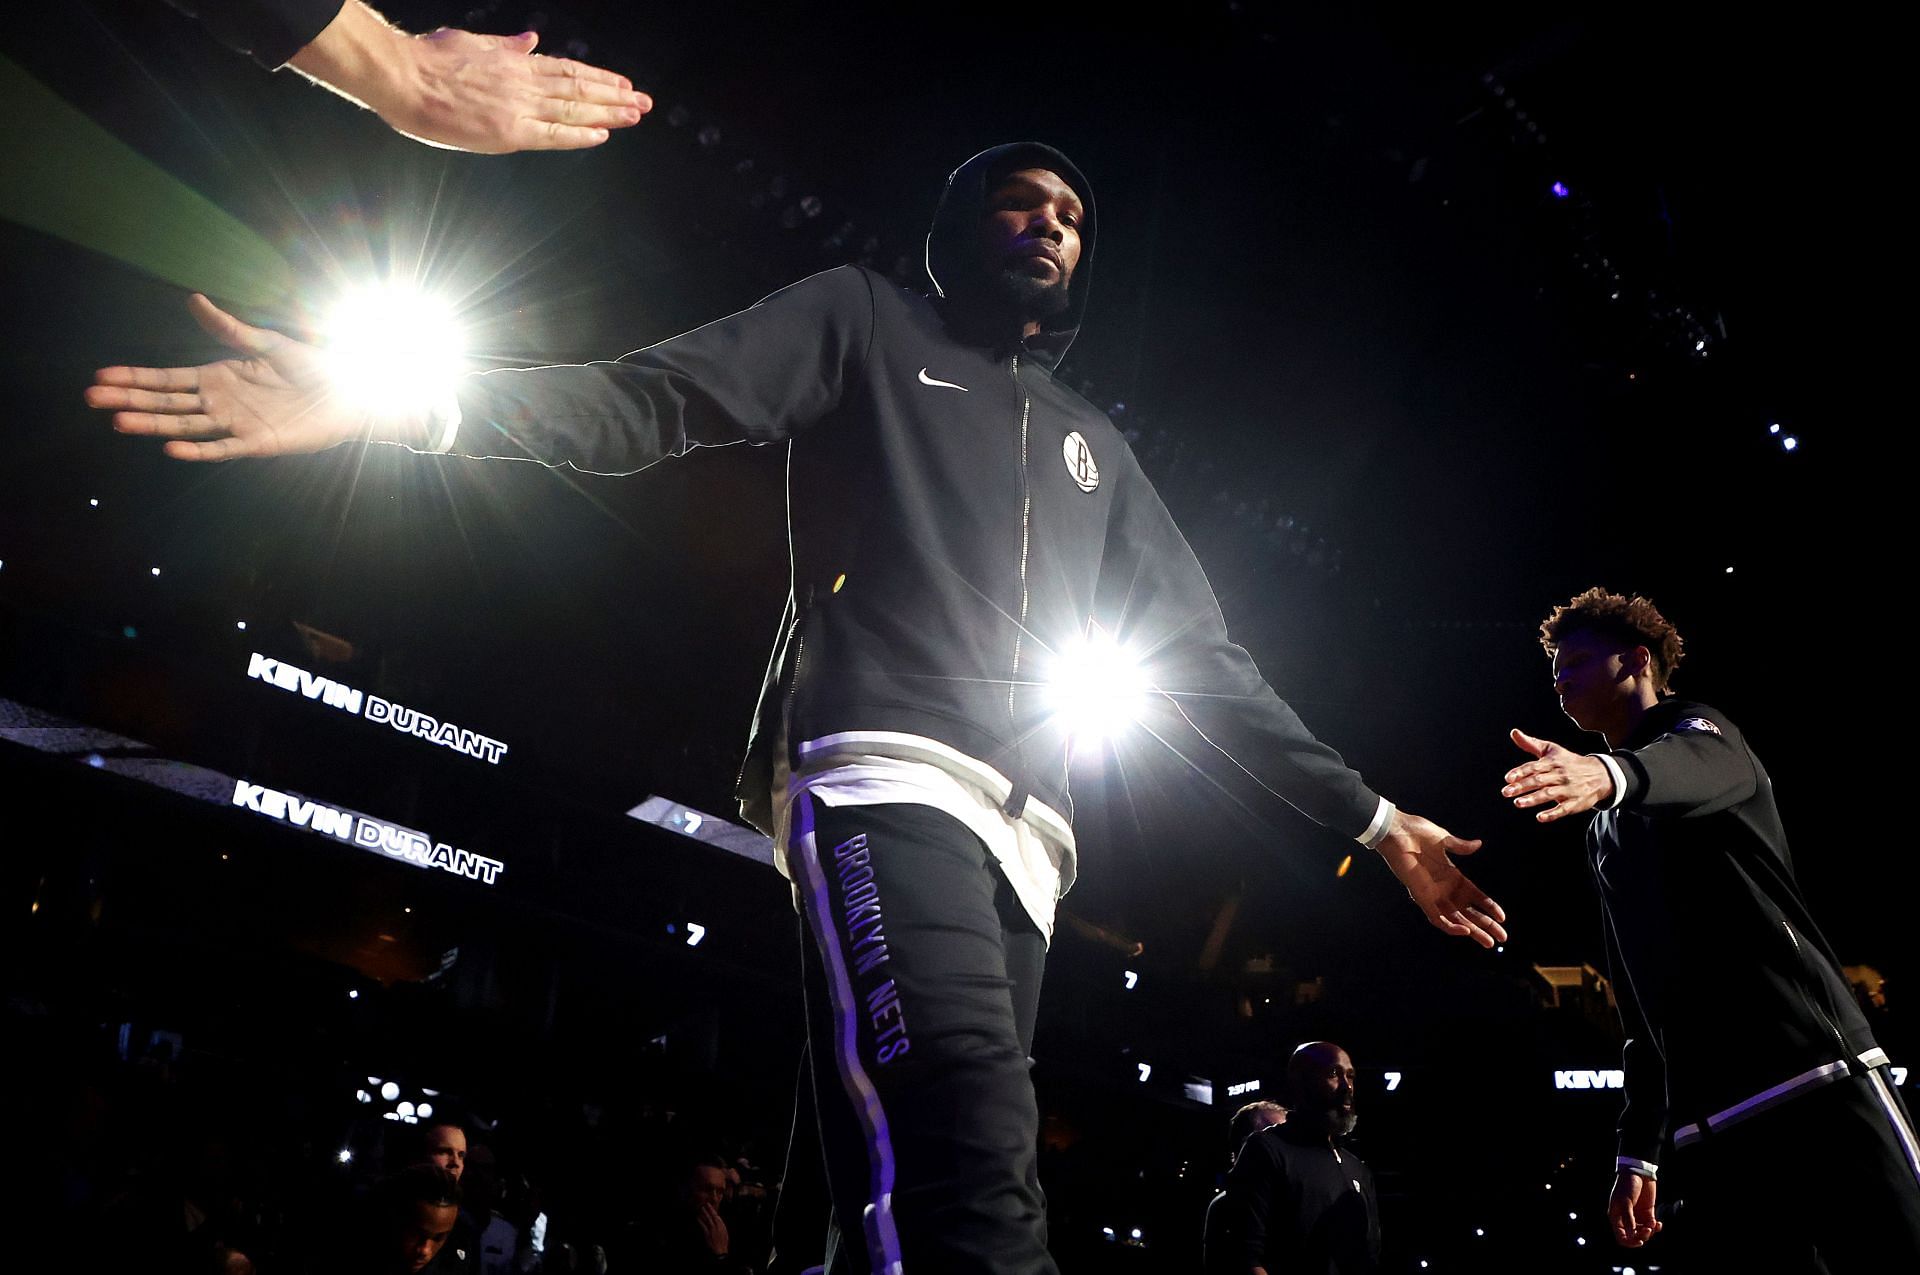 Kevin Durant is introduced at the Brooklyn Nets game